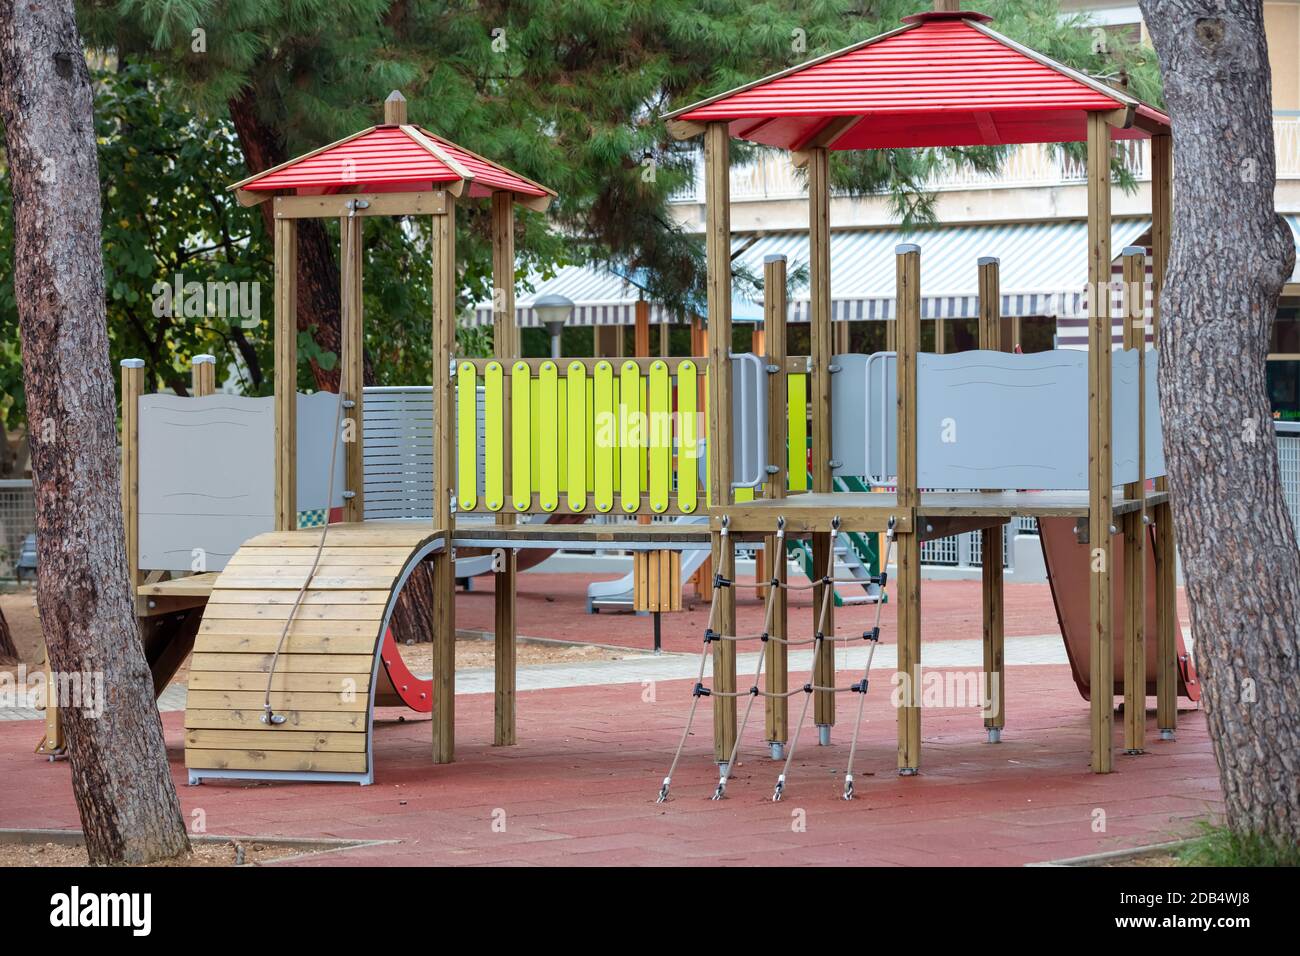 Modern playground with colorful wooden slides and ladders located near tree trunks. Kids entertaiment place Stock Photo